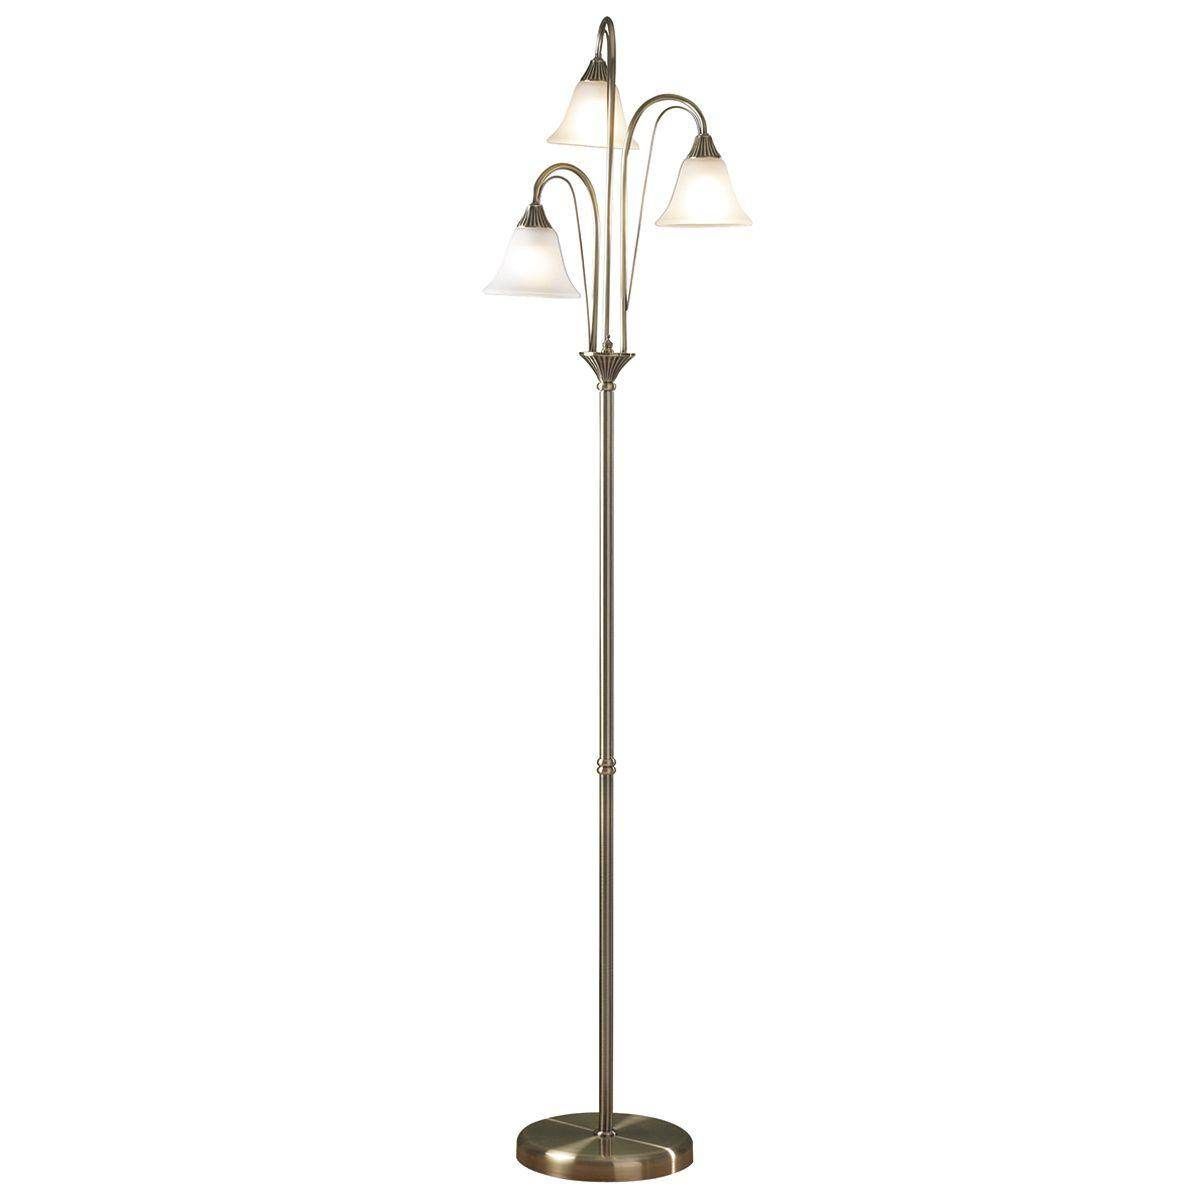 Dar Boston Floor Lamp Antique complete with Glass - Cusack Lighting